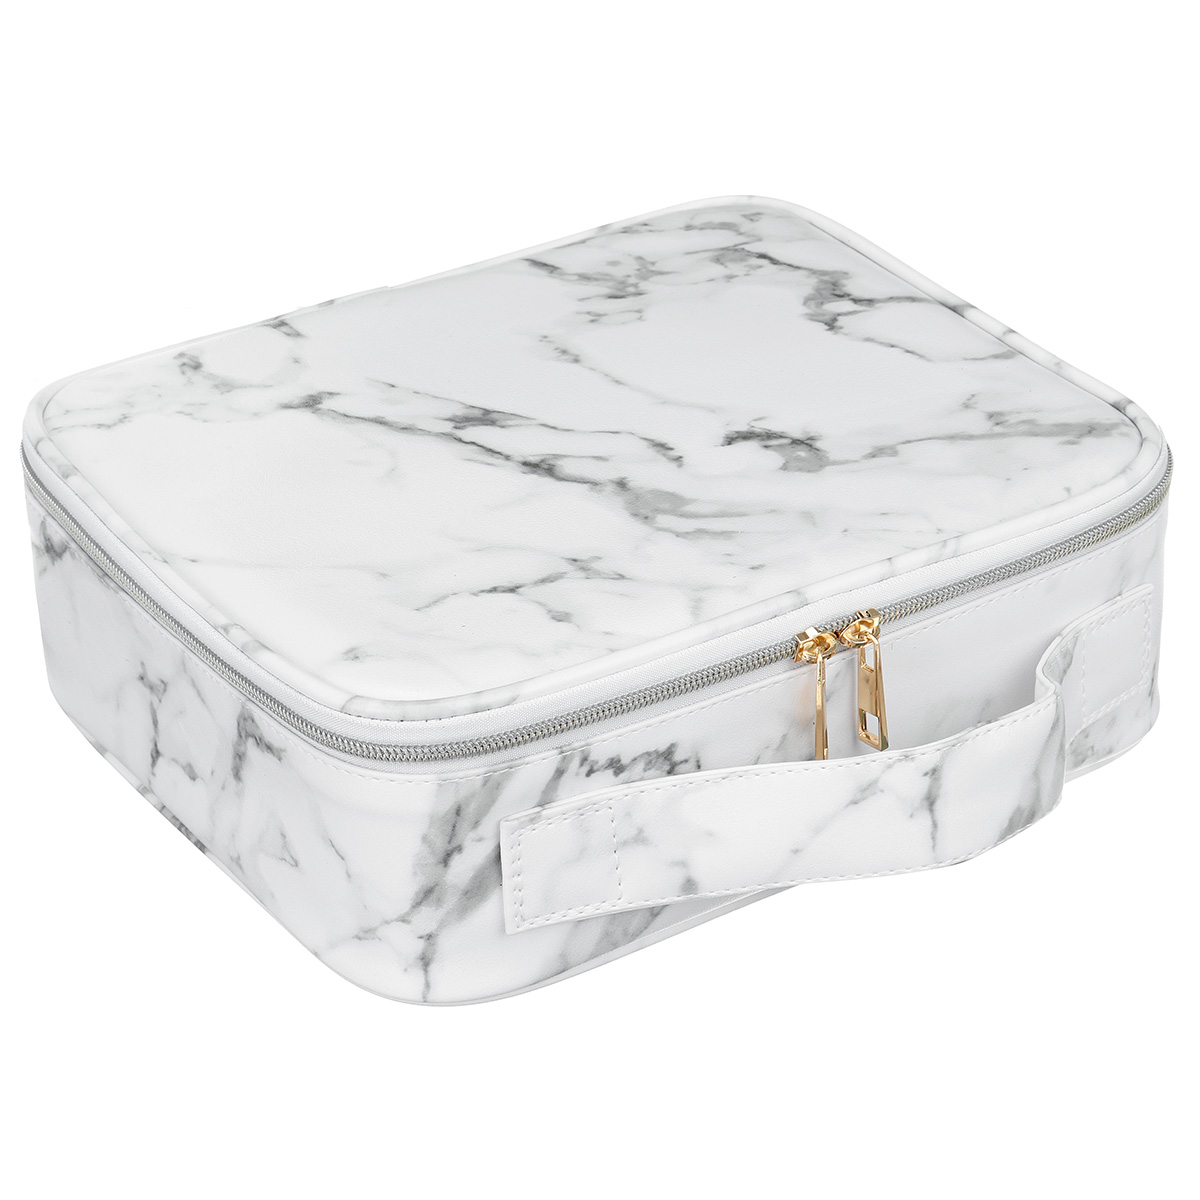 Portable-Large-Capacity-Multi-Grid-Cosmetic-Make-Up-Nail-Toiletry-Travel-Carry-Bag-Storage-Bag-Beaut-1859825-4